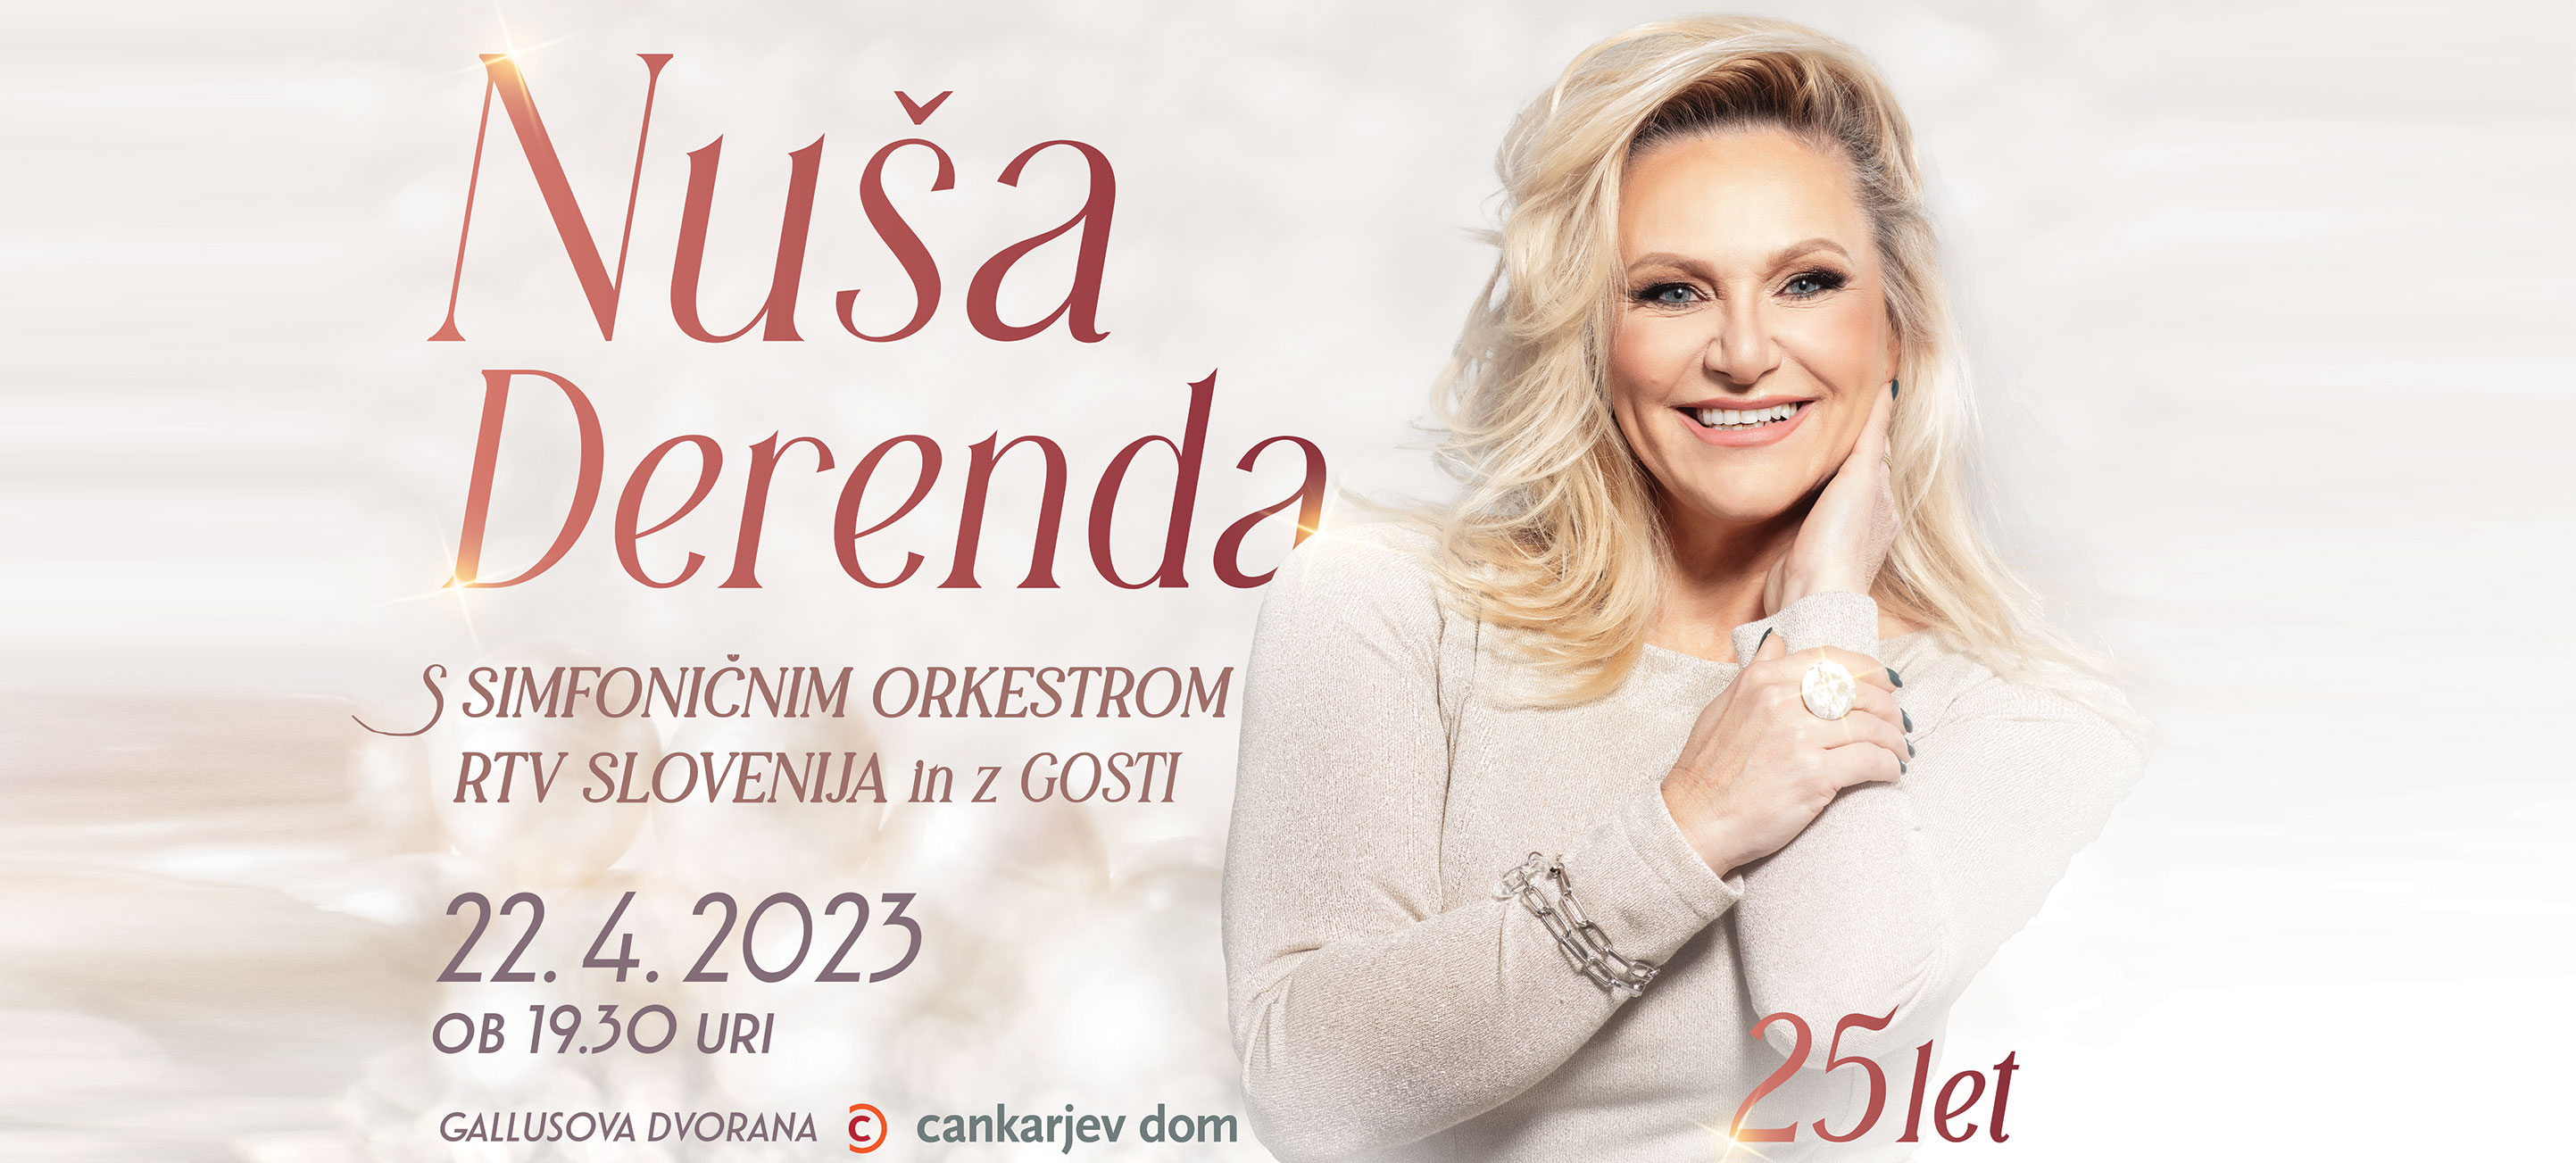 NUSA DERENDA PLAKAT 1 - A “Tip-Top” song brings Nuša back to EMA after six years!